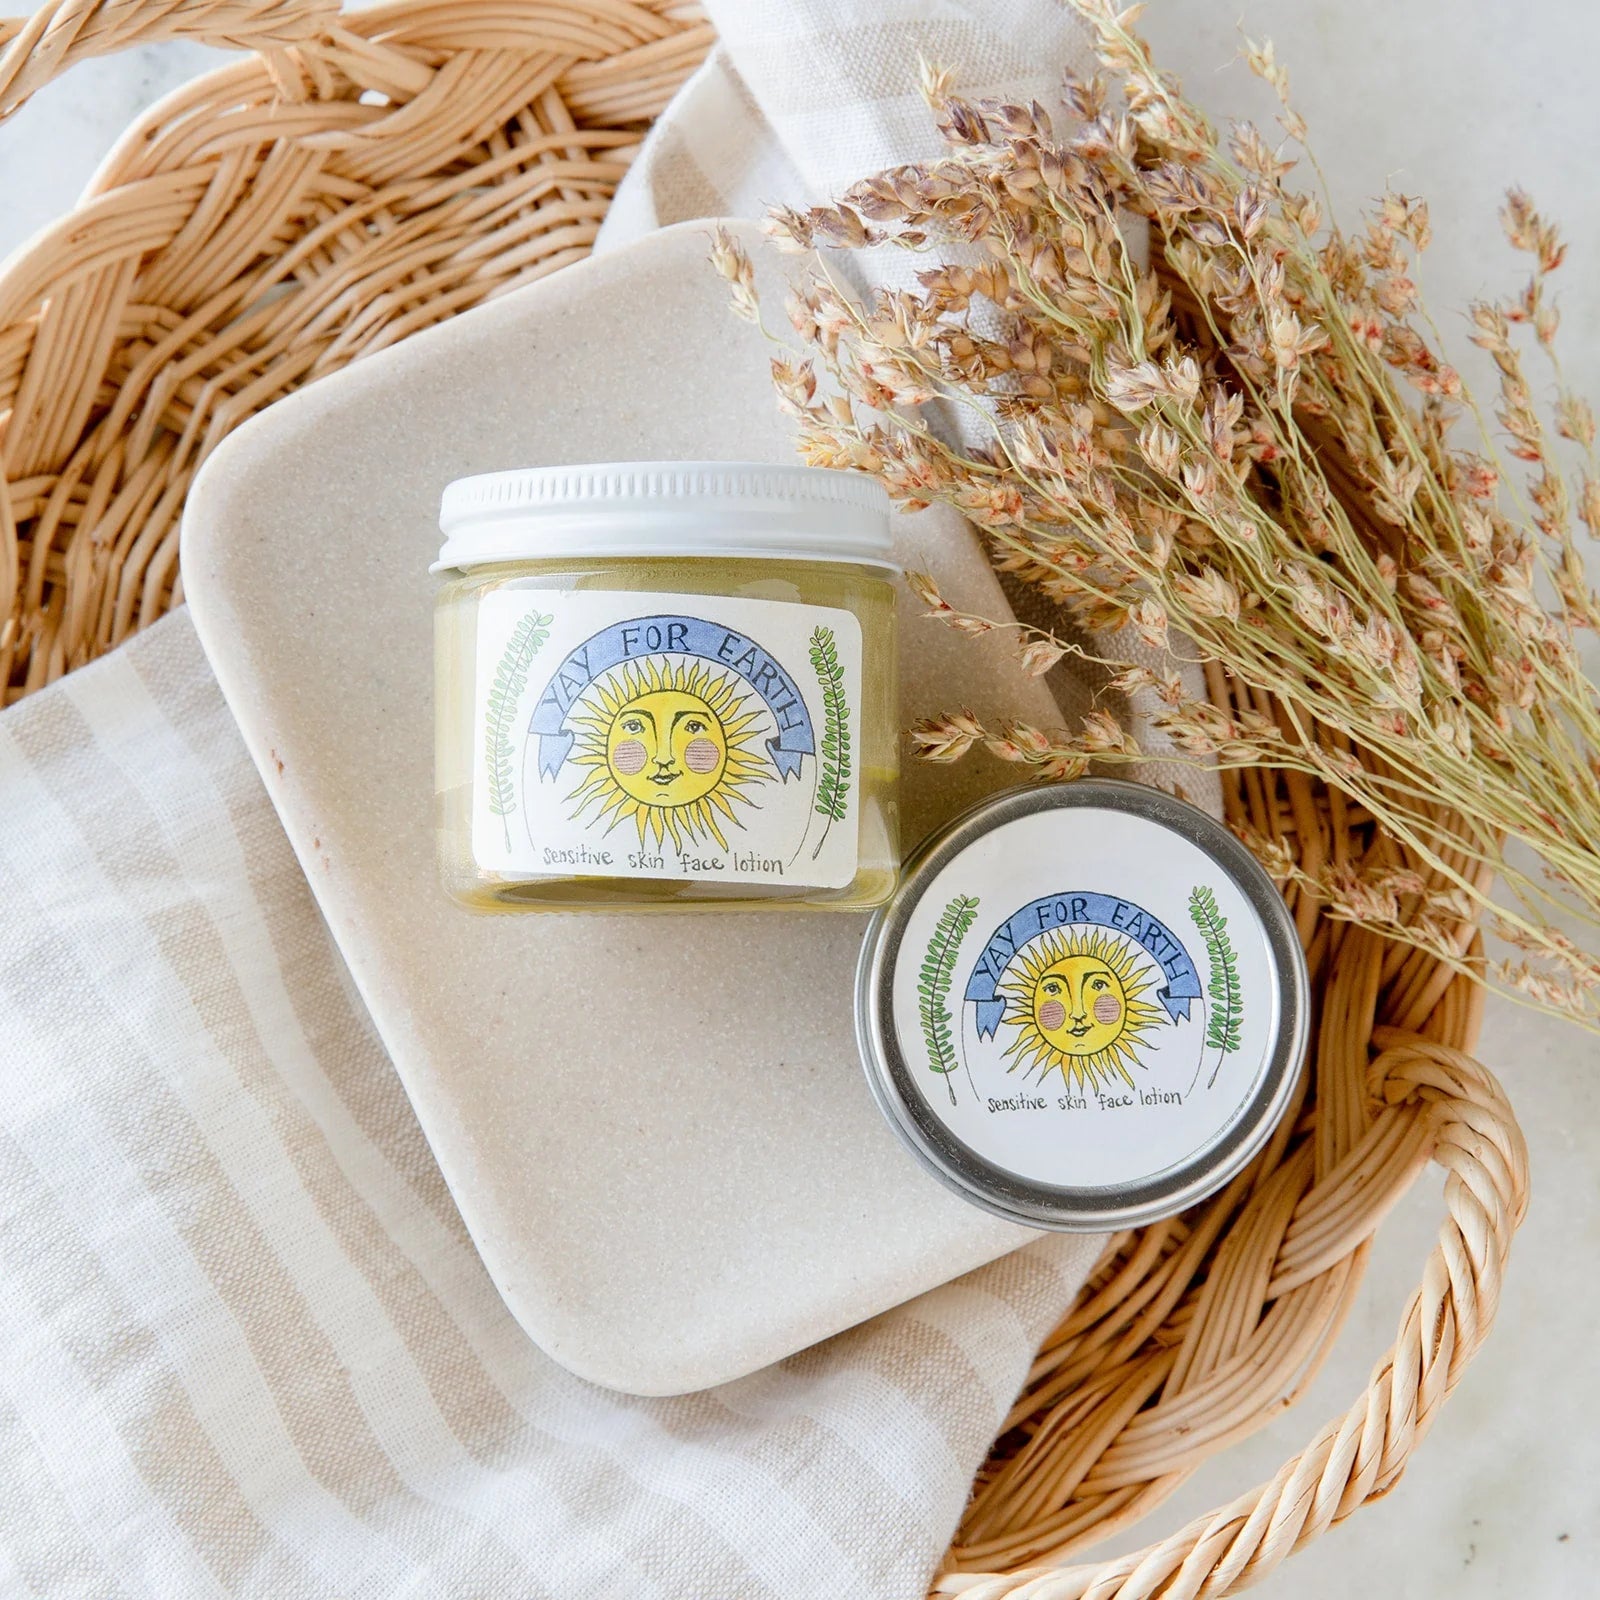 Discover Healthy, Rejuvenated Skin With Yay For Earth Sensitive Skin Face Lotion - Earth Ahead